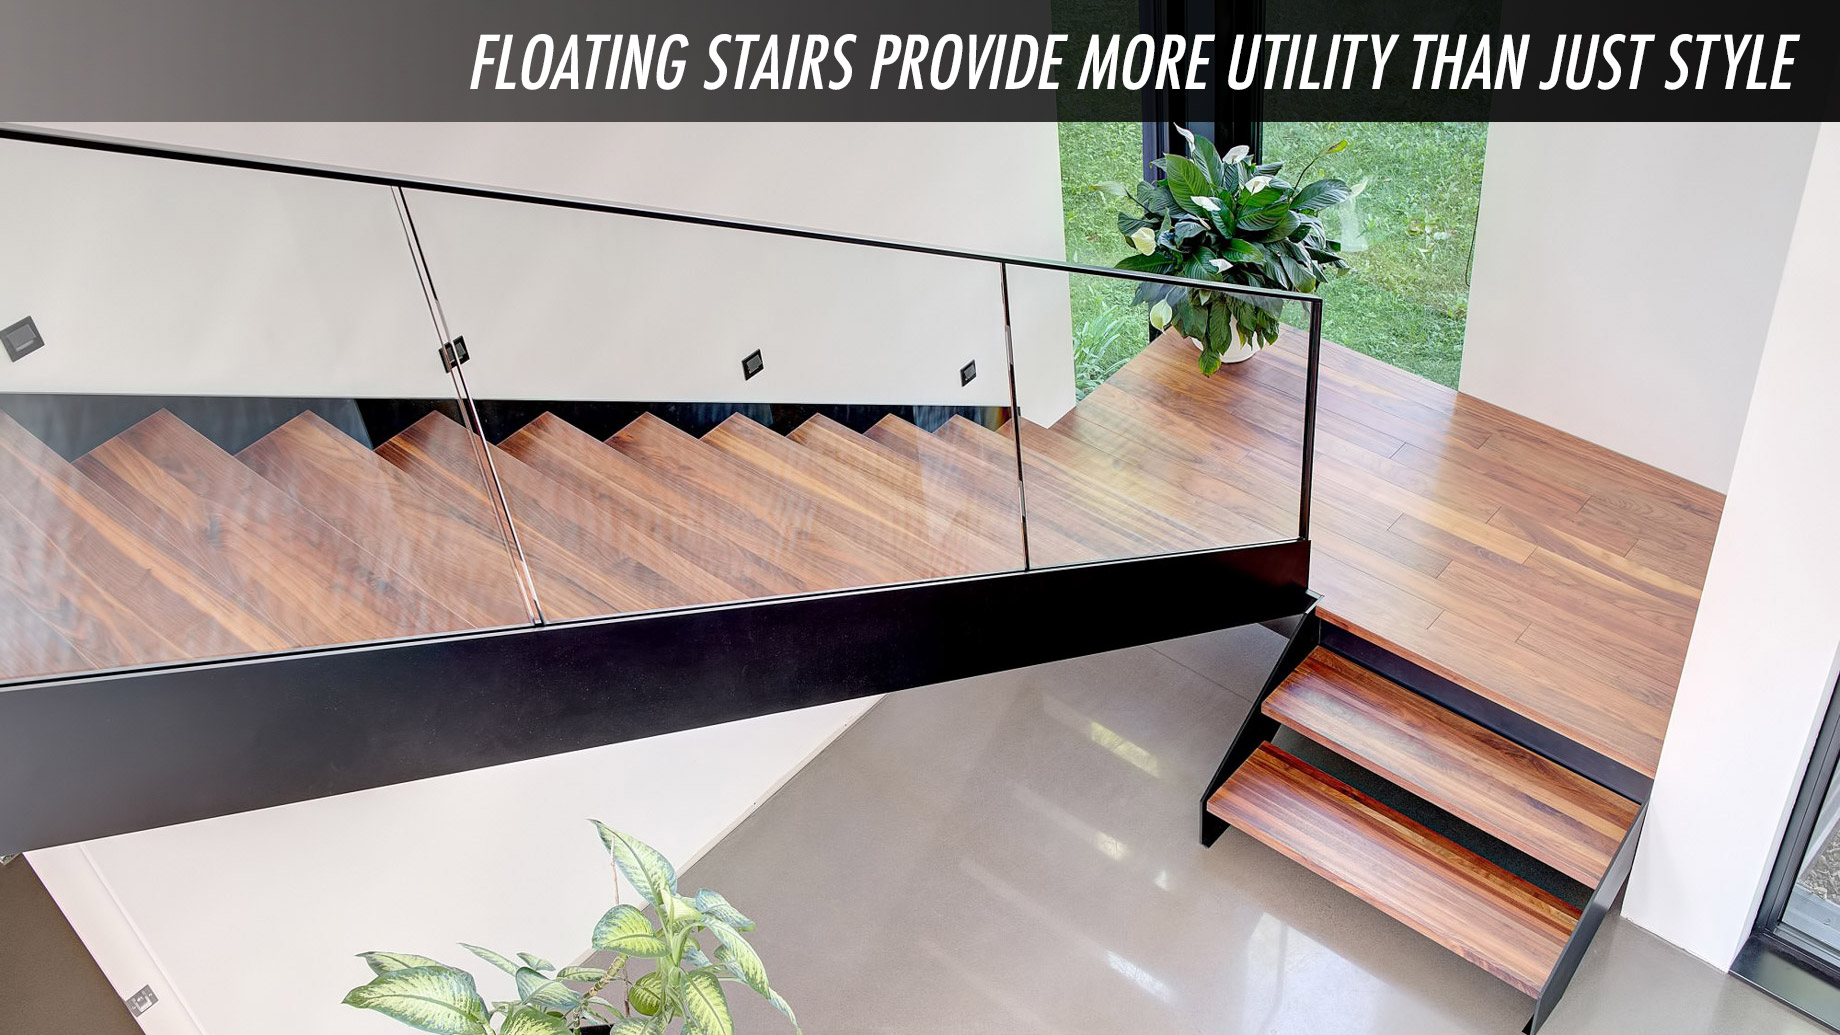 Home Design Tips - Floating Stairs Provide More Utility Than Just Style